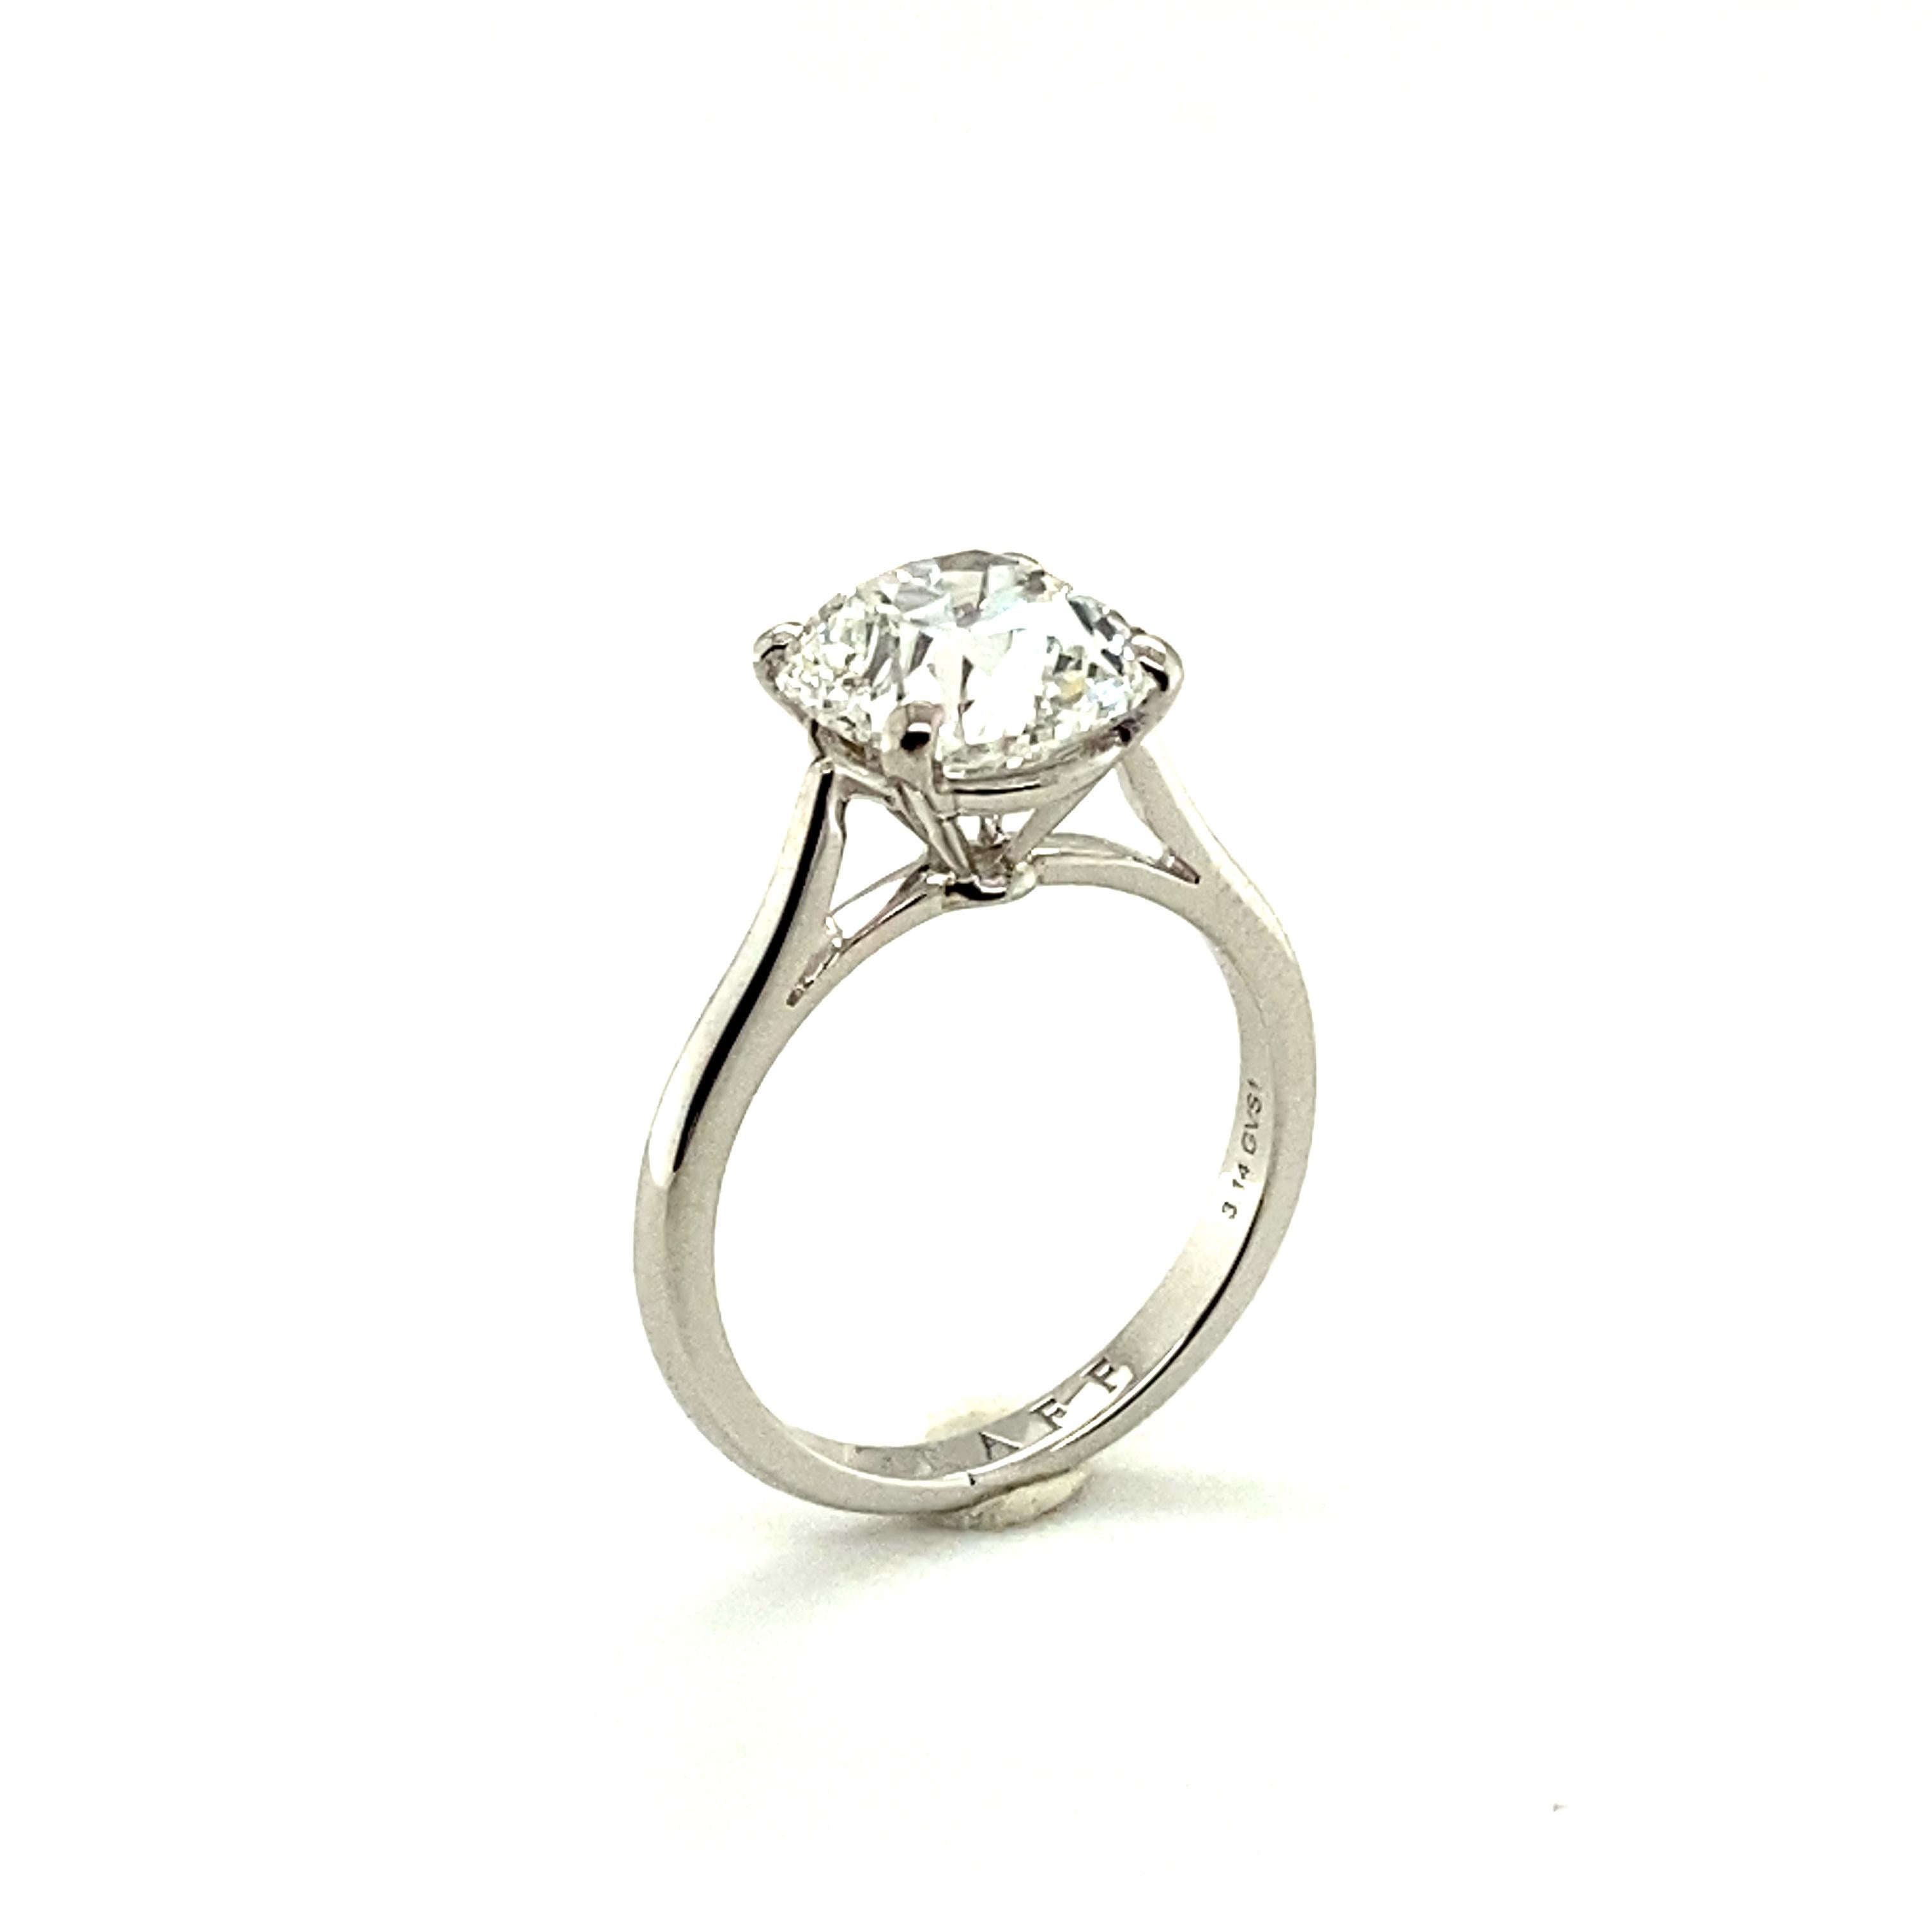 Graff Ring in 18 Karat White Gold Set with a 3.14 Ct Cushion-Shaped Diamond 9